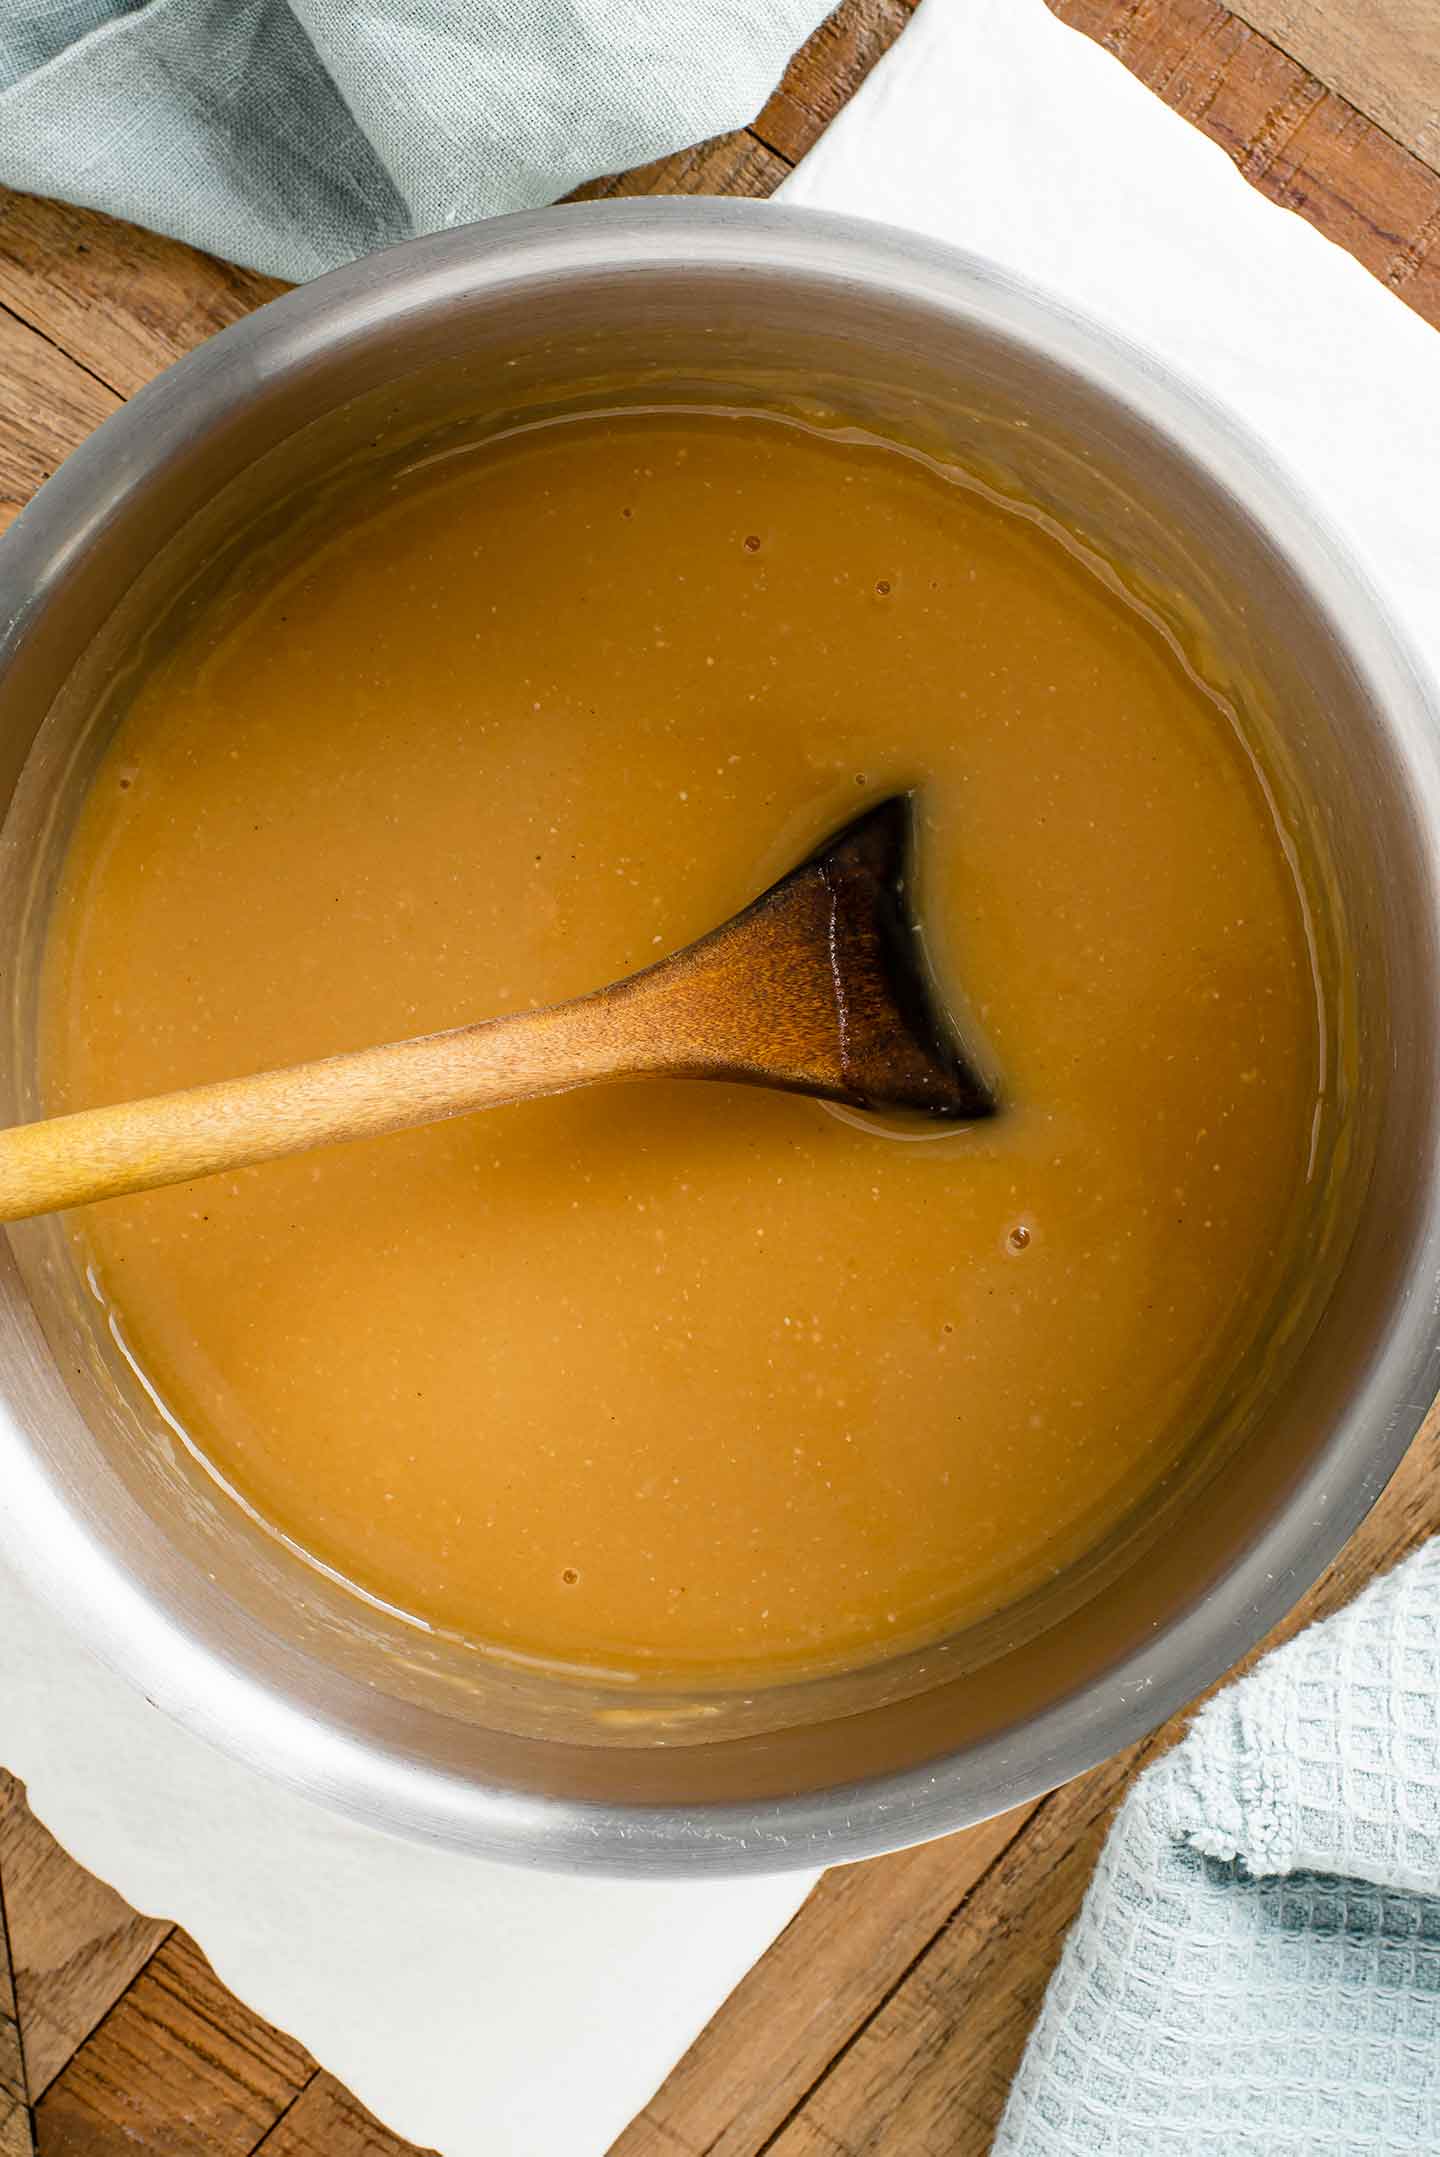 Top down view of a golden coloured gravy in a pot with a wooden spoon stirring the gravy.